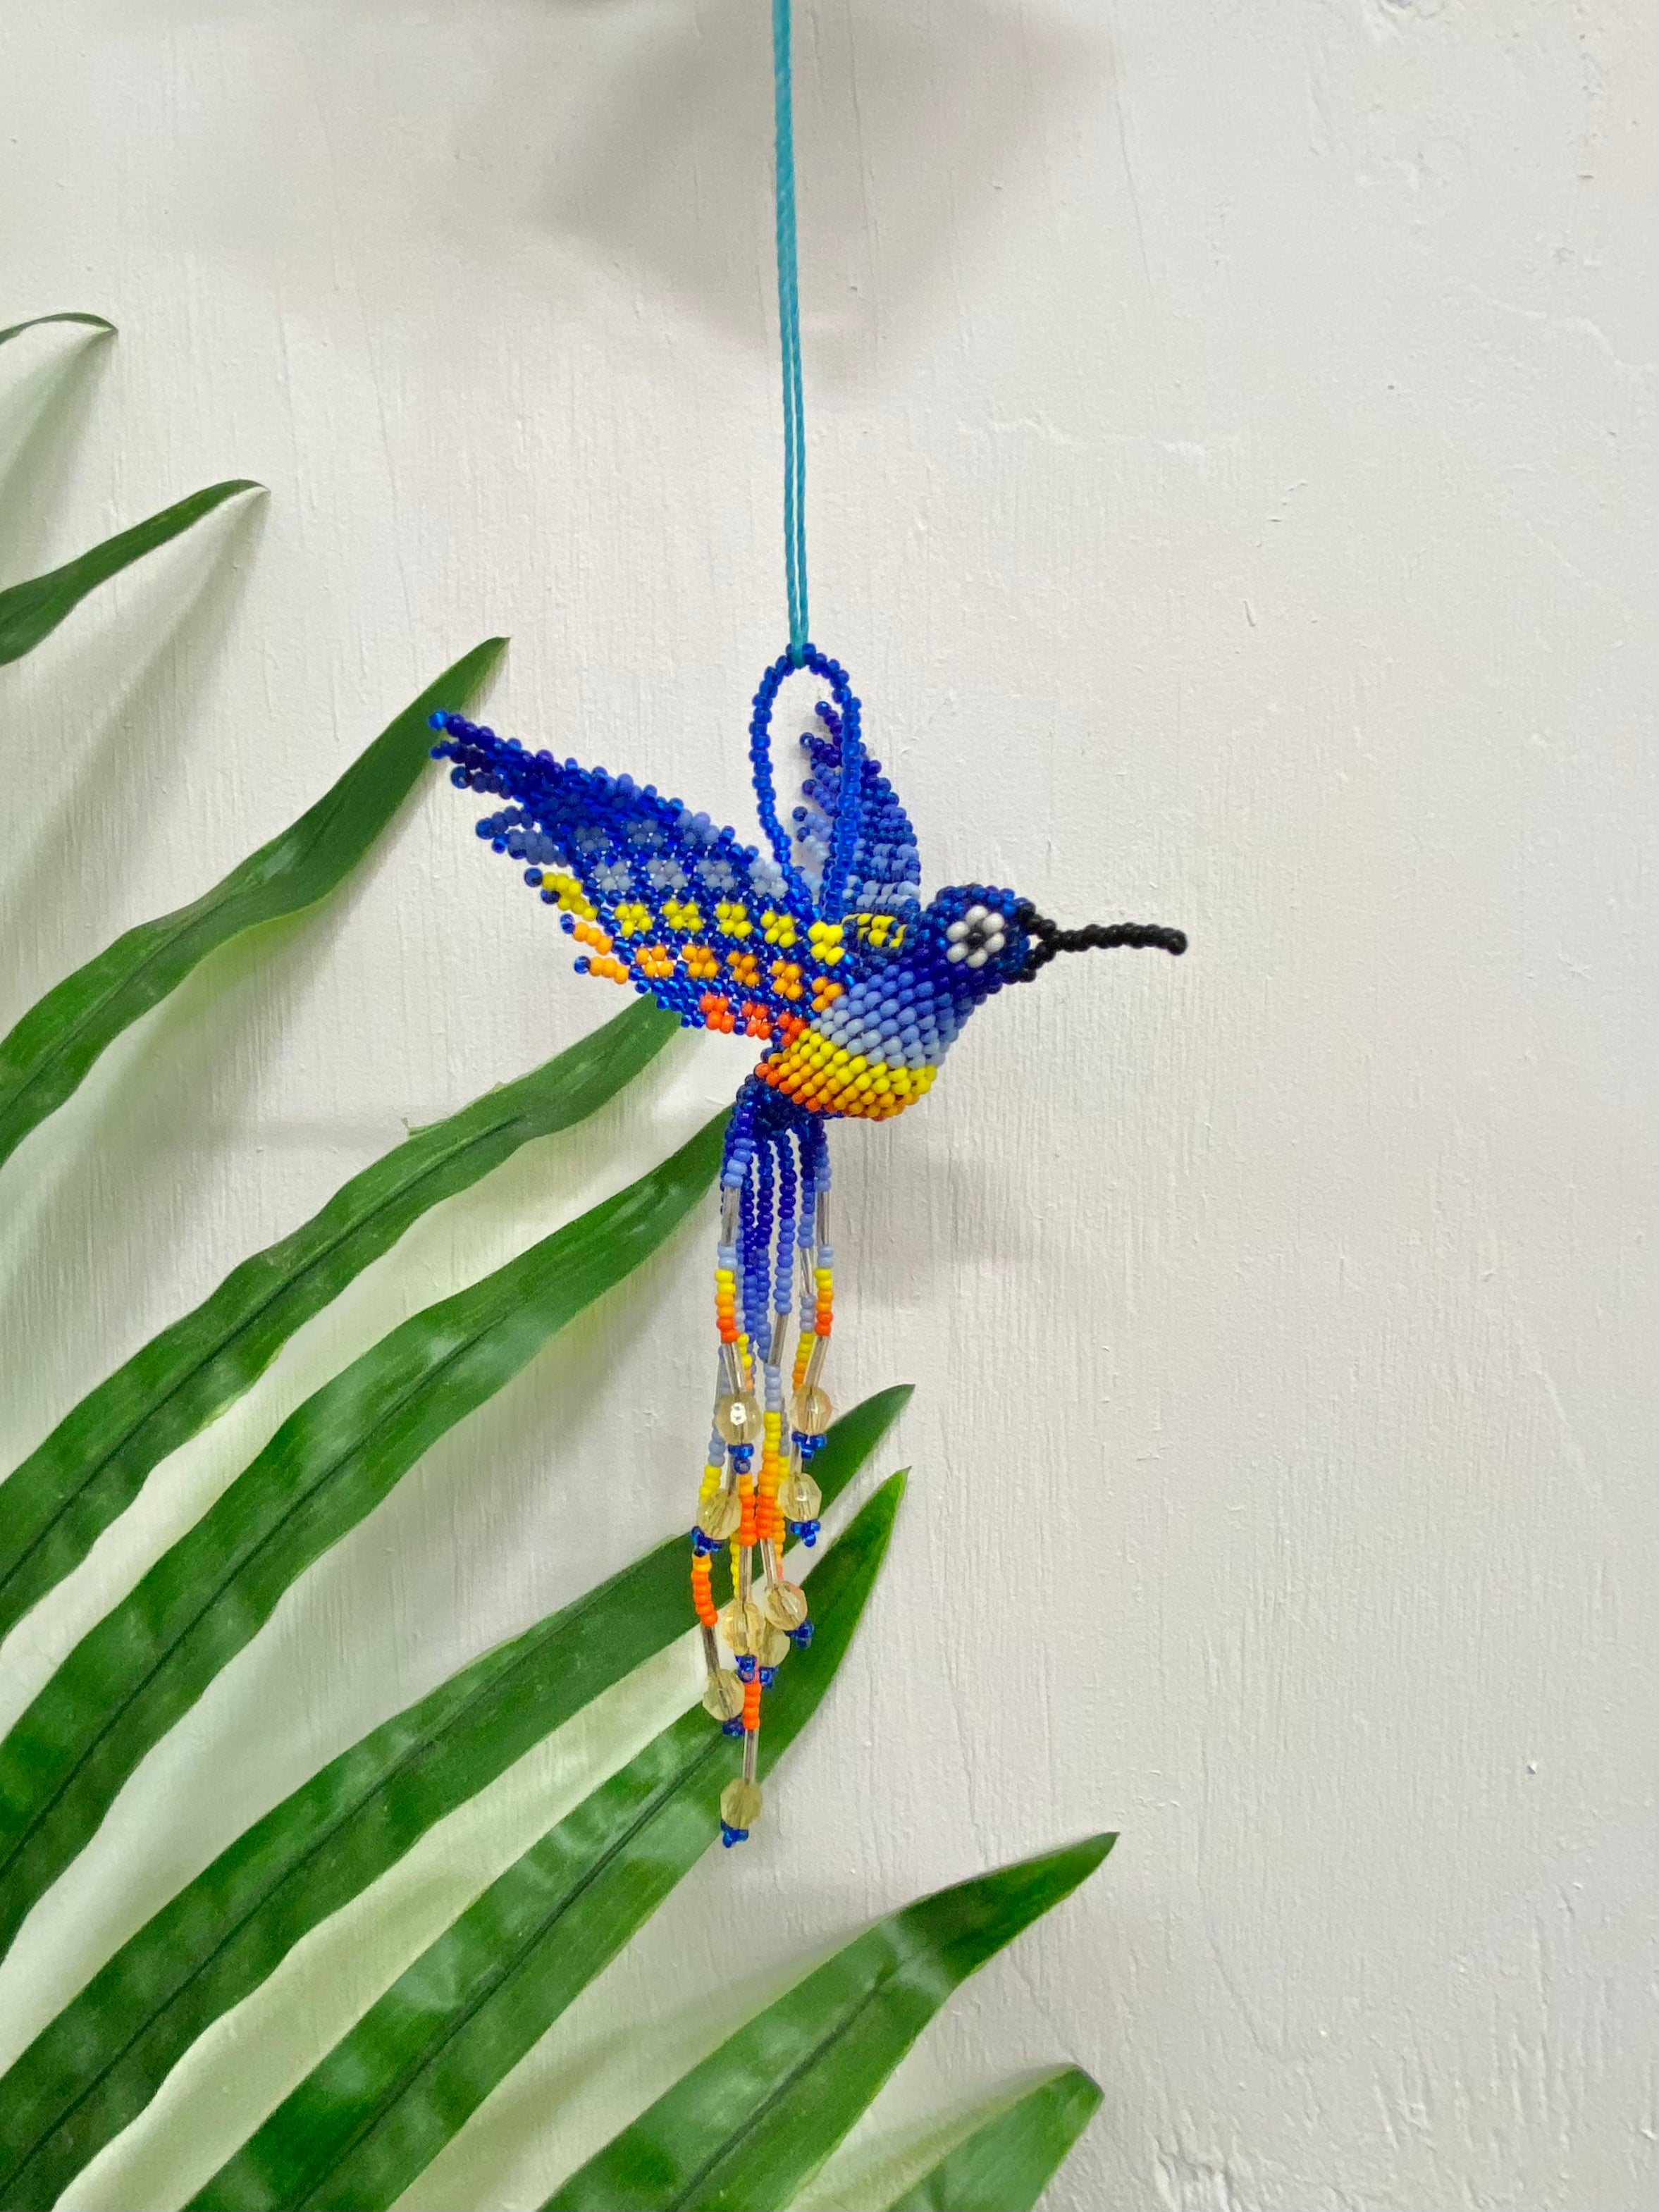 Hand-Beaded Glass Peacock Ornaments from Guatemala Pair 'Real Beauty' -  International Medical Corps